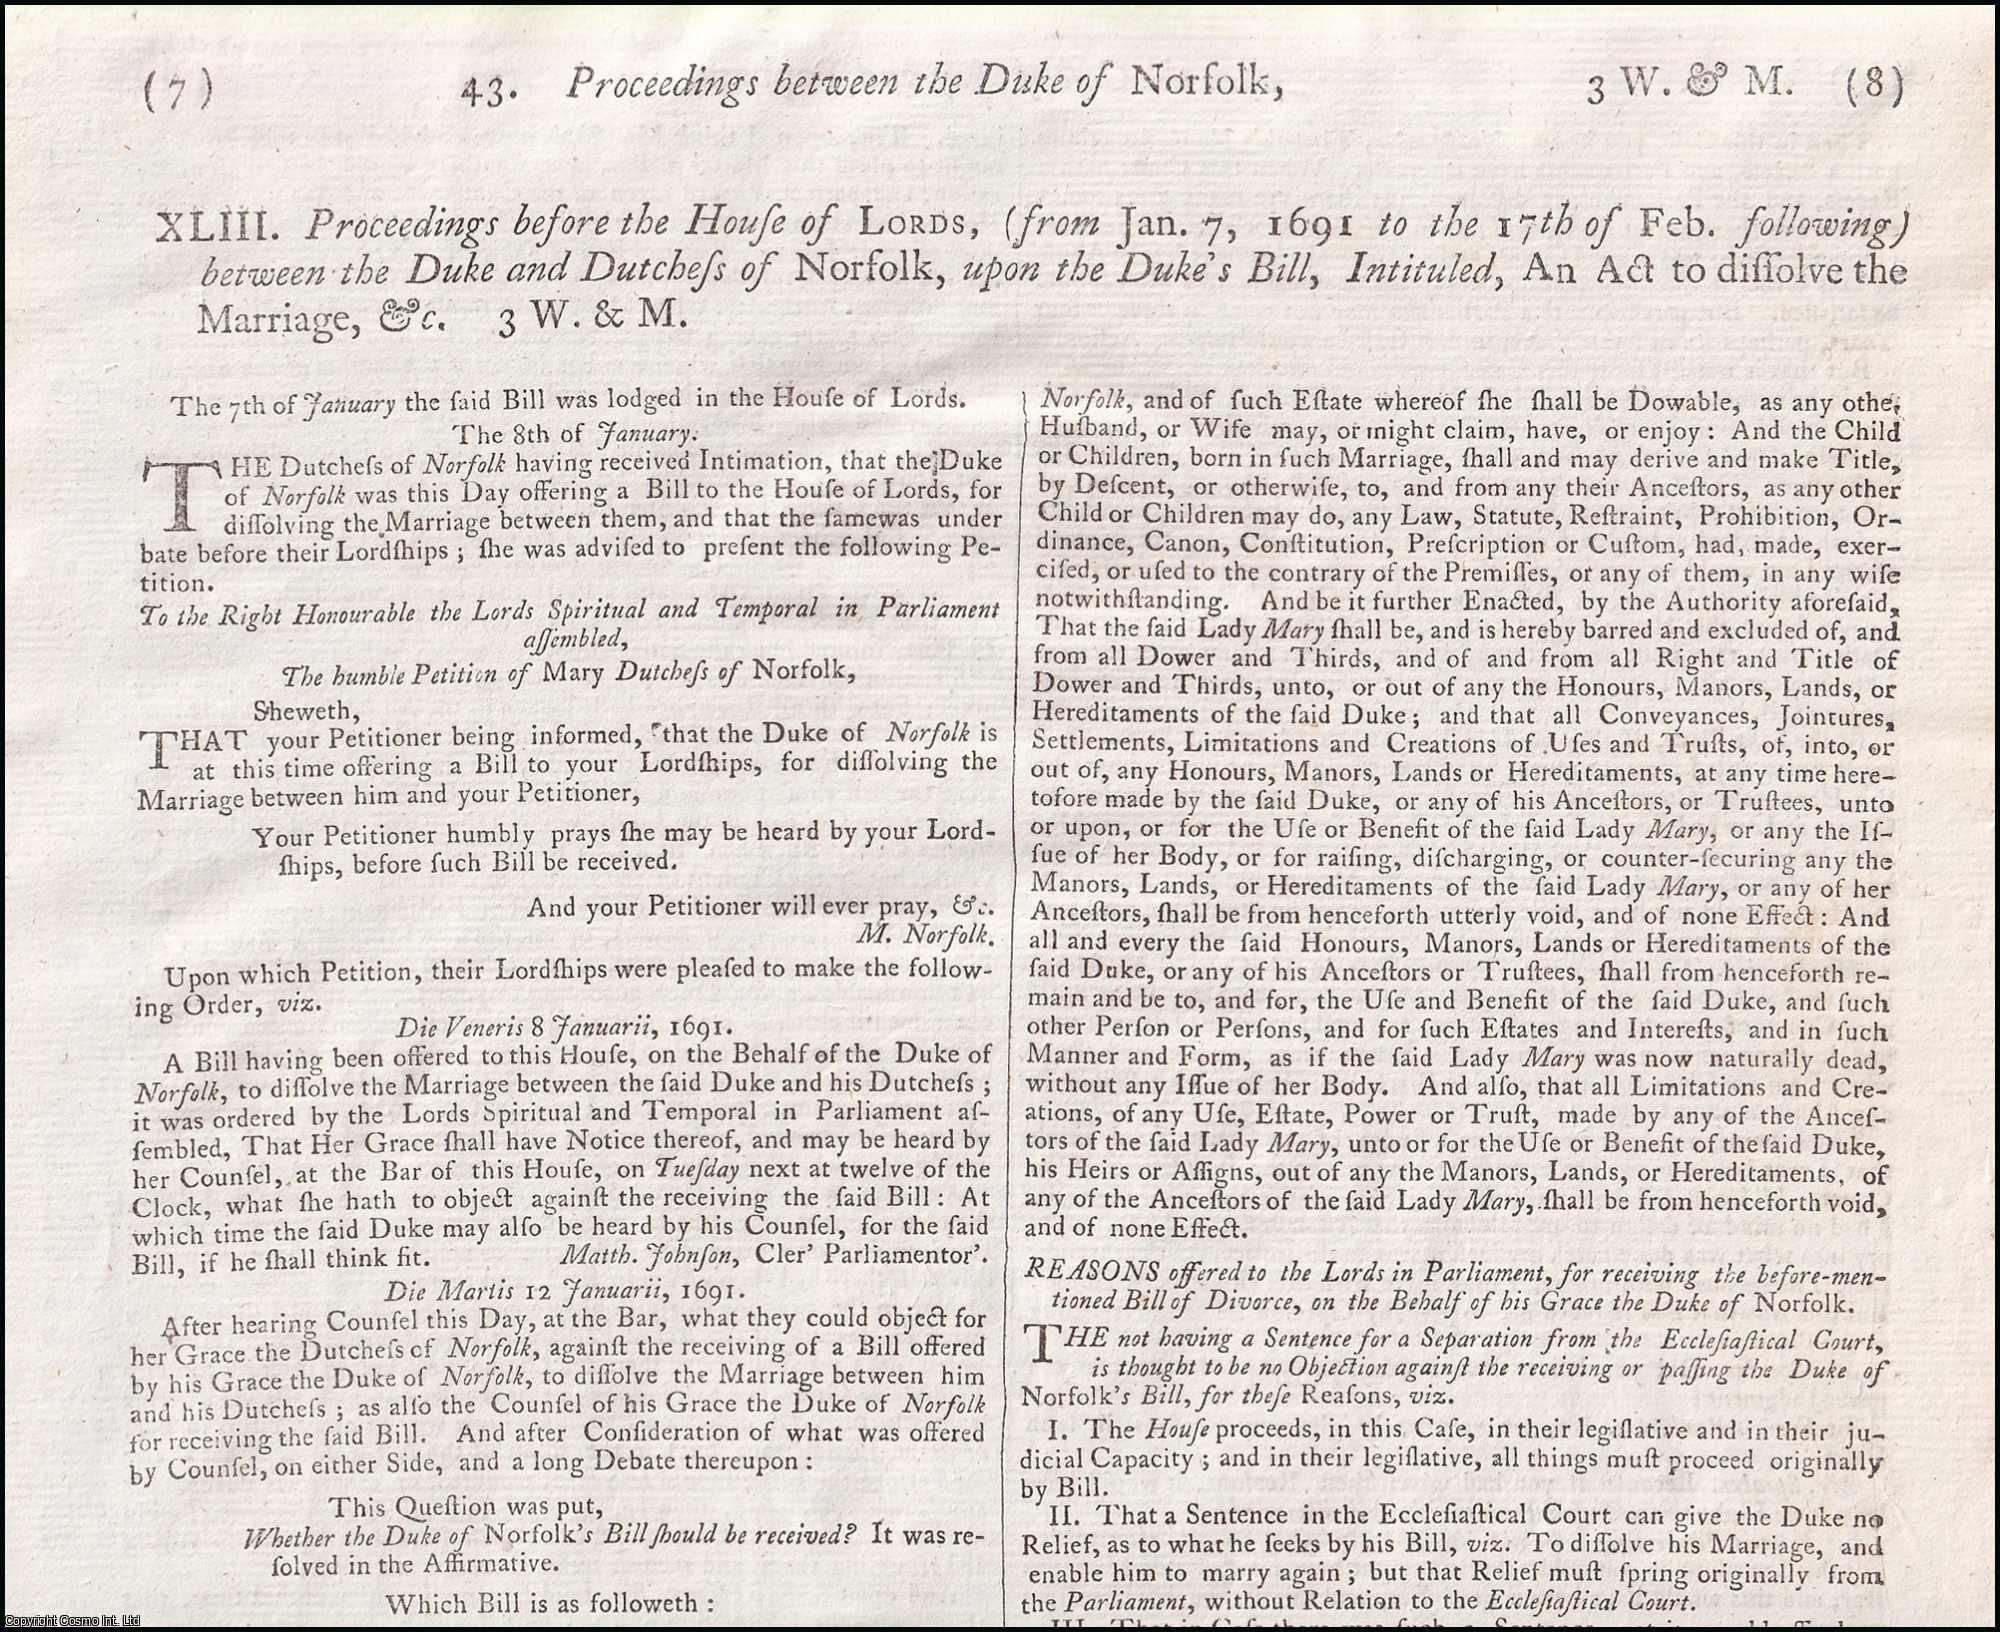 [Trial]. - Proceedings before the House of Lords, (from January 7th, 1691 to the 17th of February following) between the Duke and Dutchess of Norfolk, upon the Duke's Bill, Intituled, an Act to dissolve the Marriage, &c. An original report from the Collected State Trials.